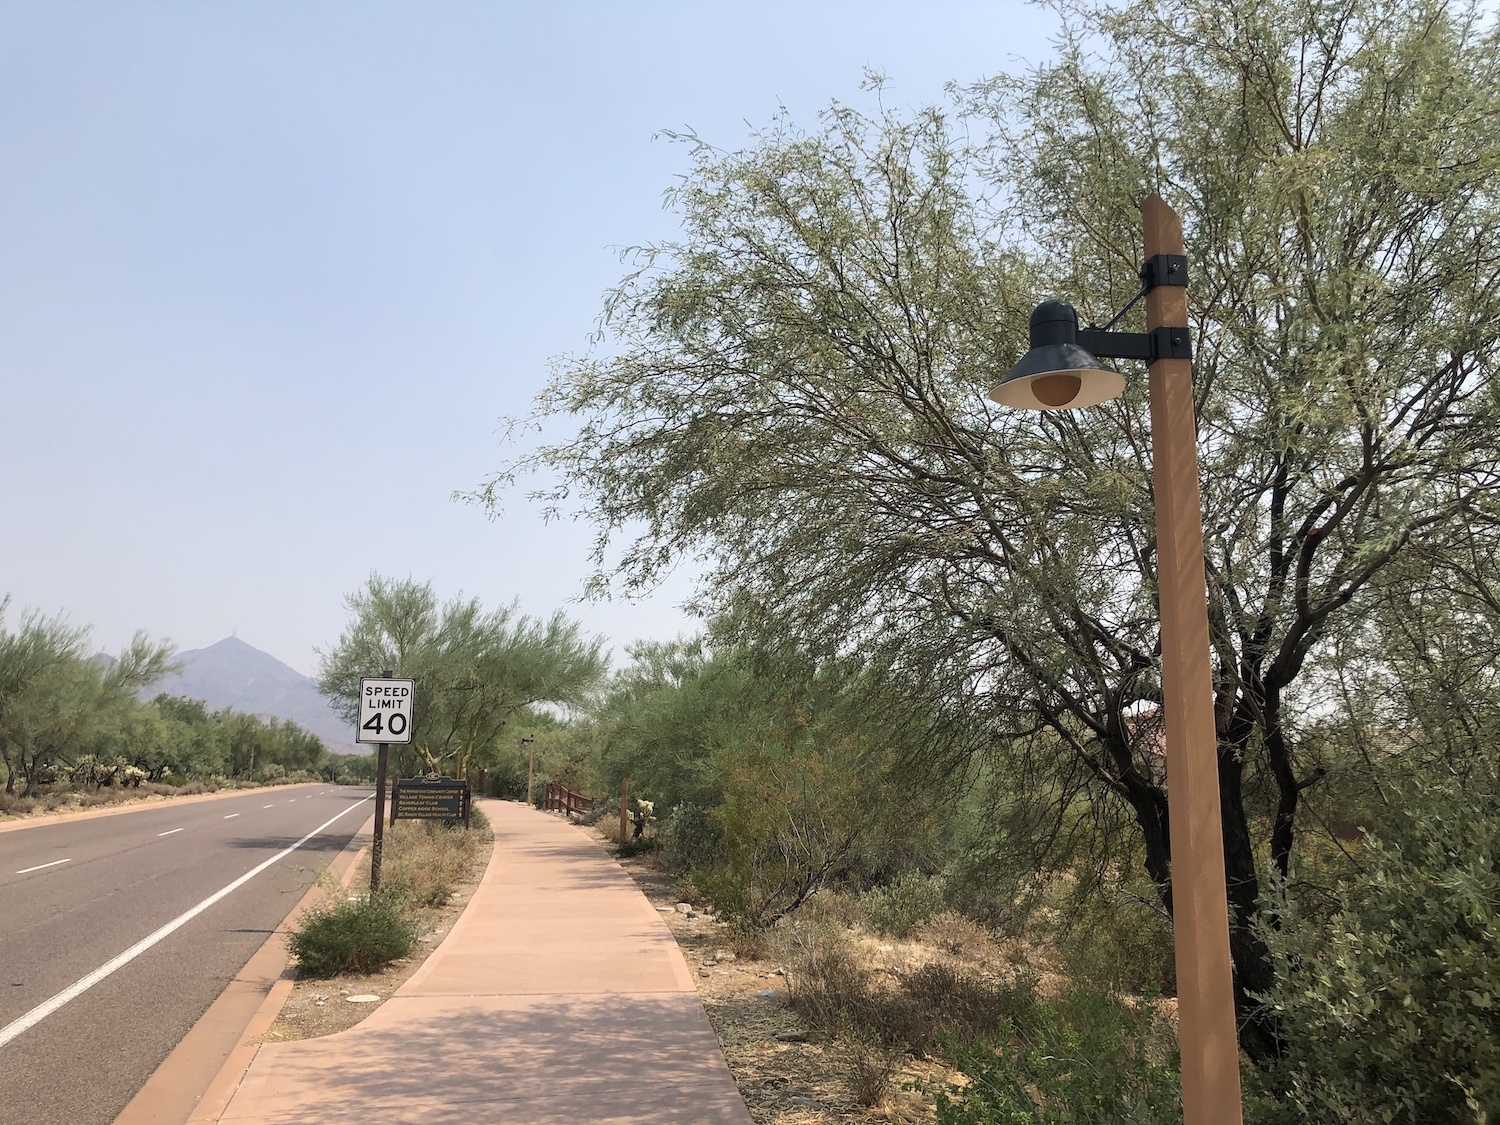 Sonoran Desert road with a 40-mile speed limit sign and street lamp. September 2020